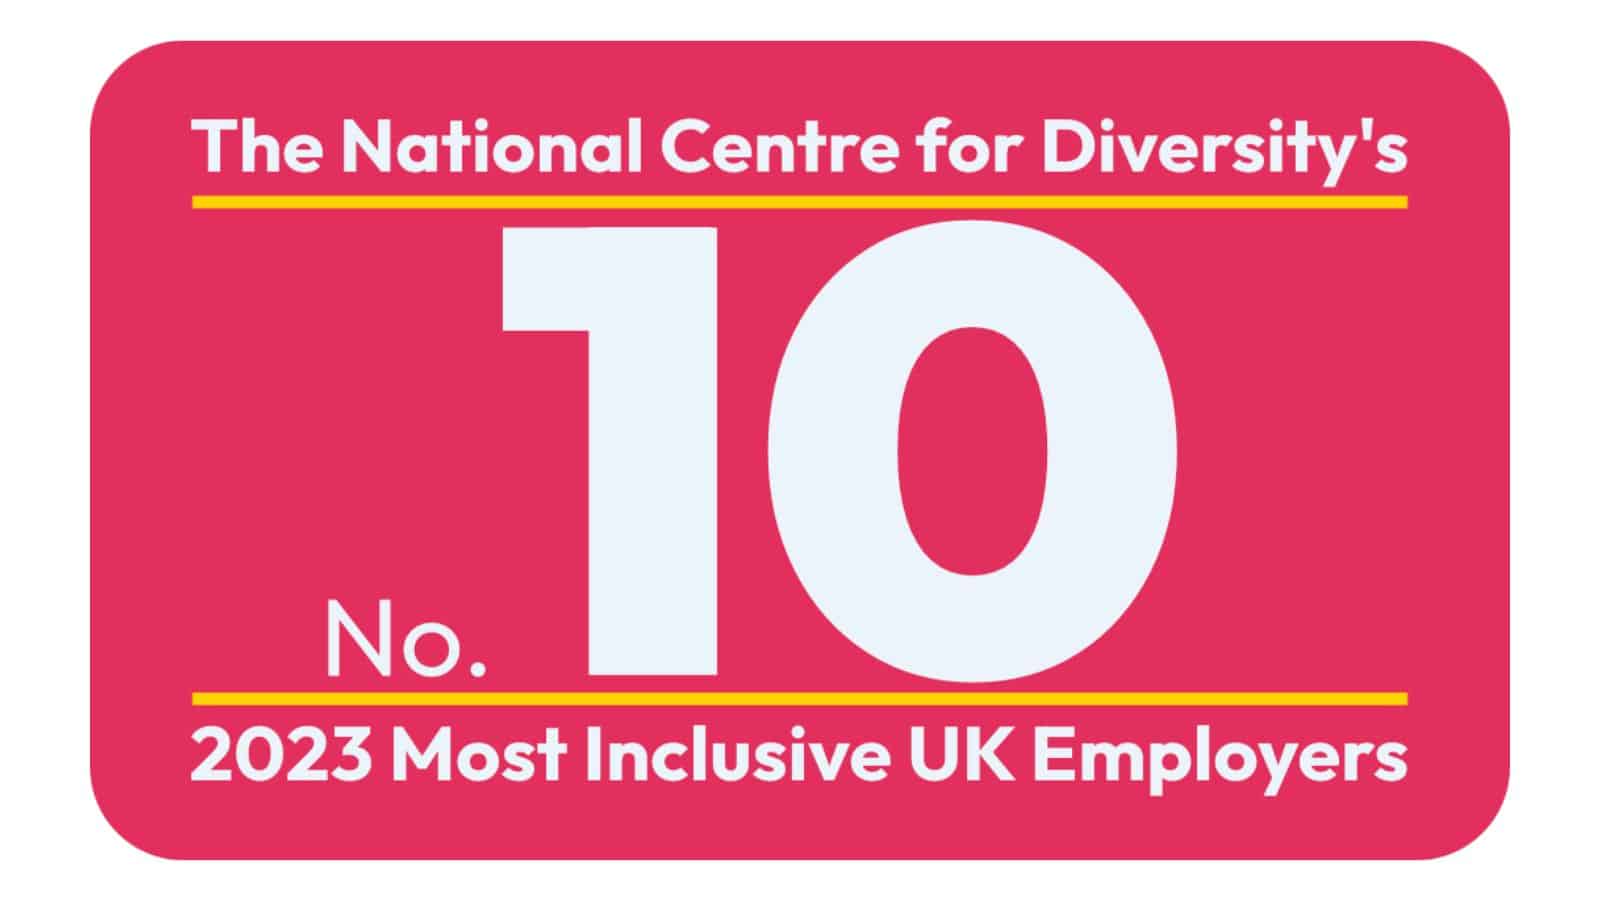 This is an image of the graphic saying "The National Centre for Diversity, Number 10, 2023 Most Inclusive UK Employers."